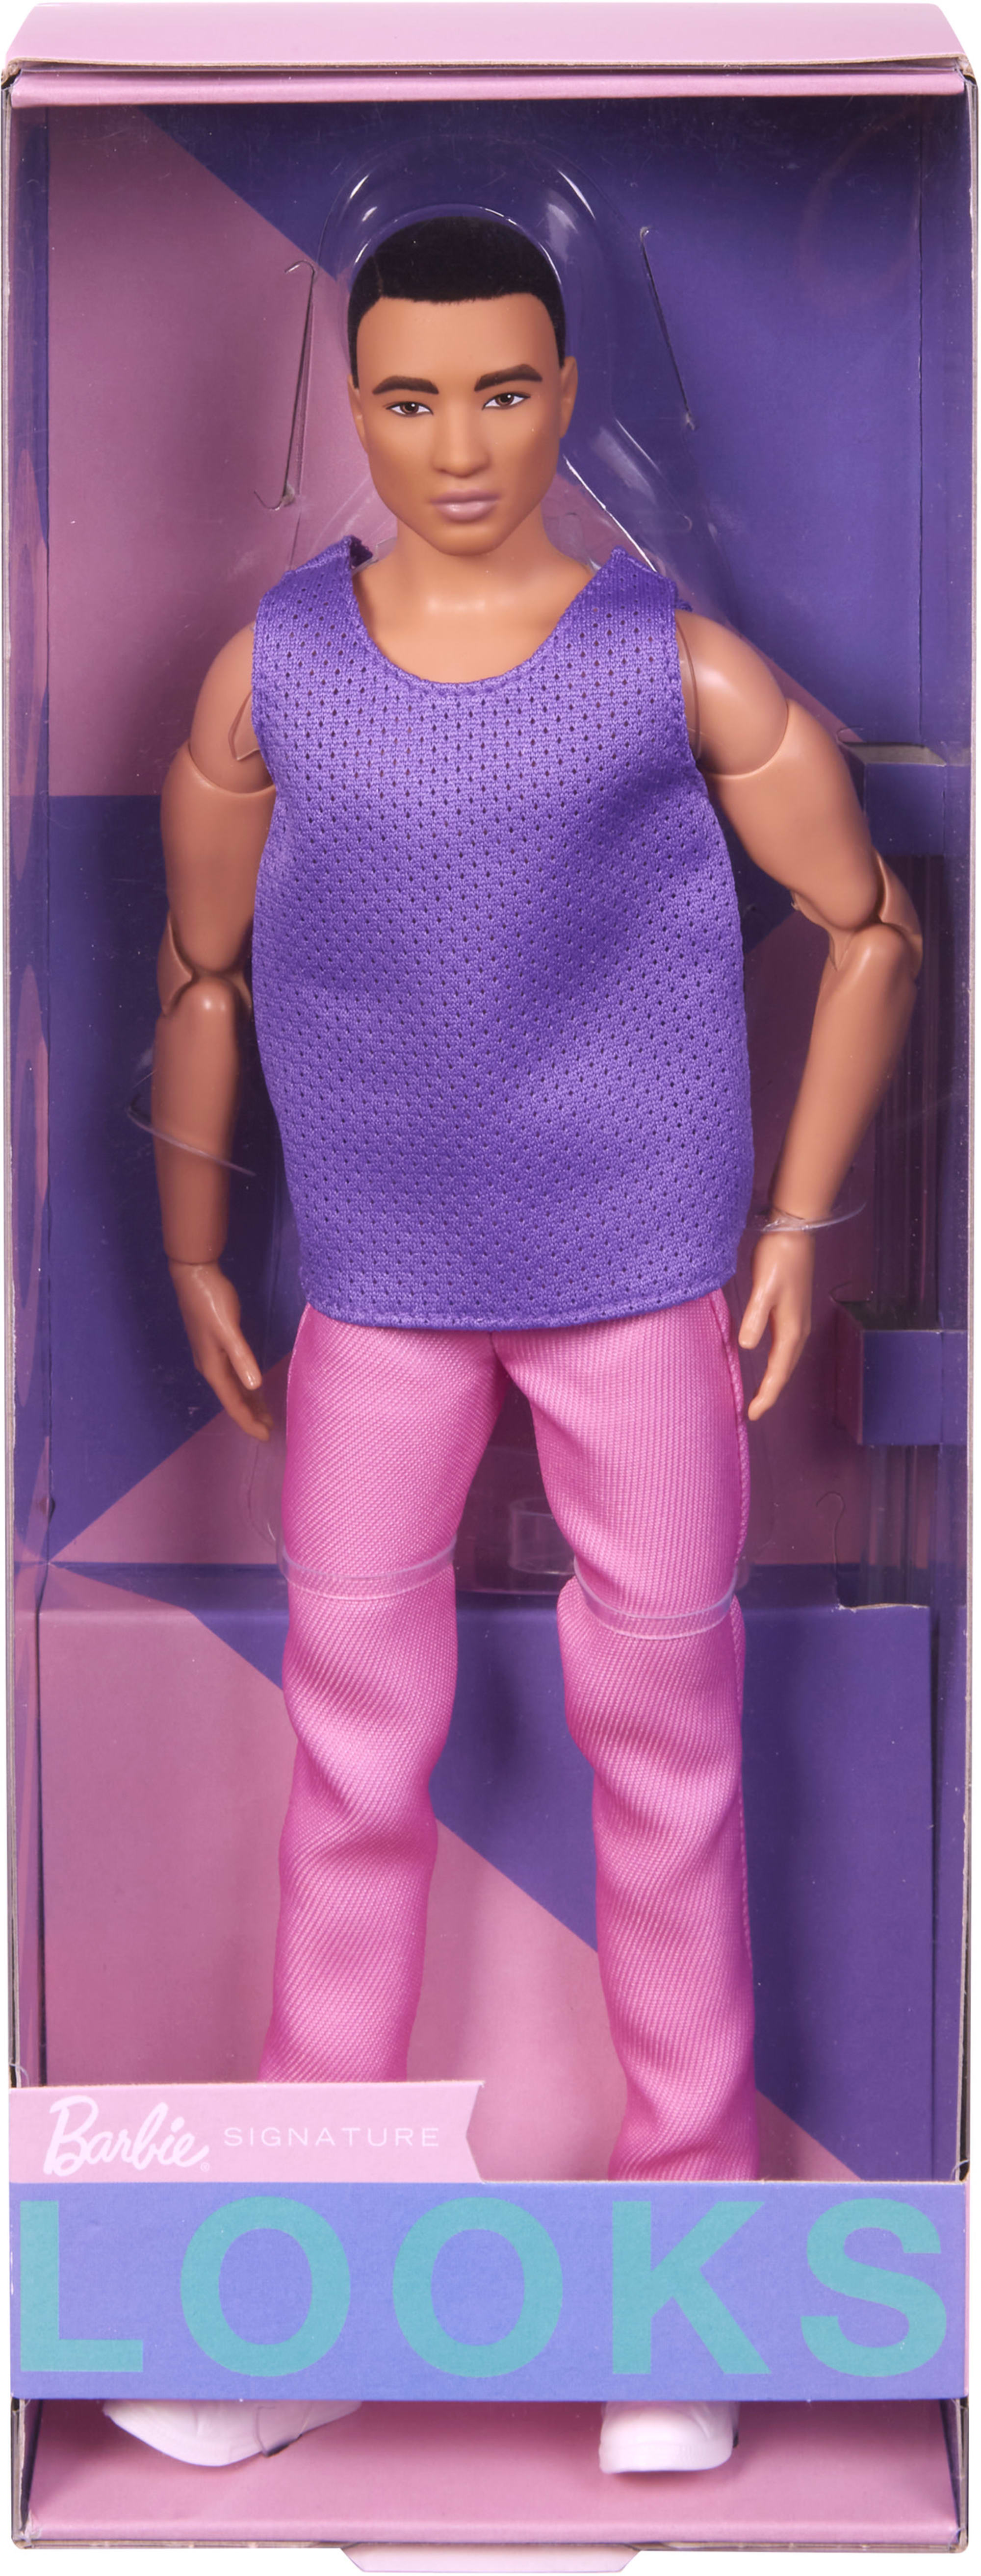 Ken Doll | Barbie Looks | Pink and Purple Outfit | MATTEL